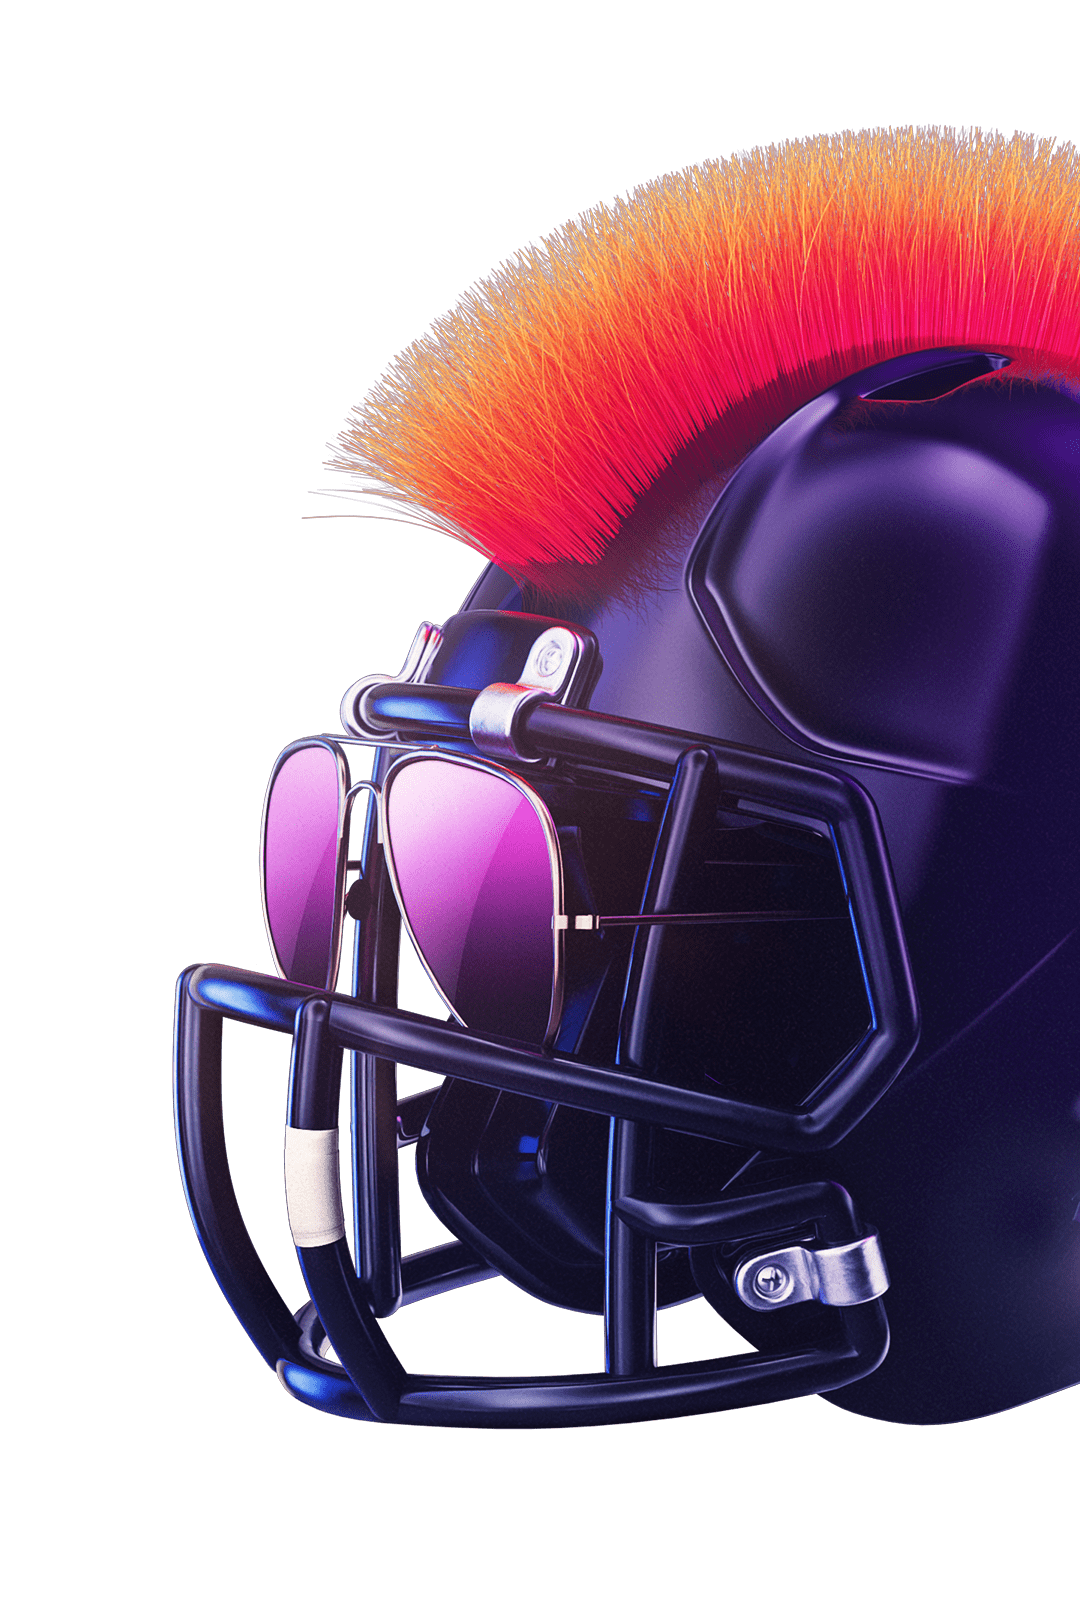 Football helmet with sunglasses, smiley face sticker, and mohawk